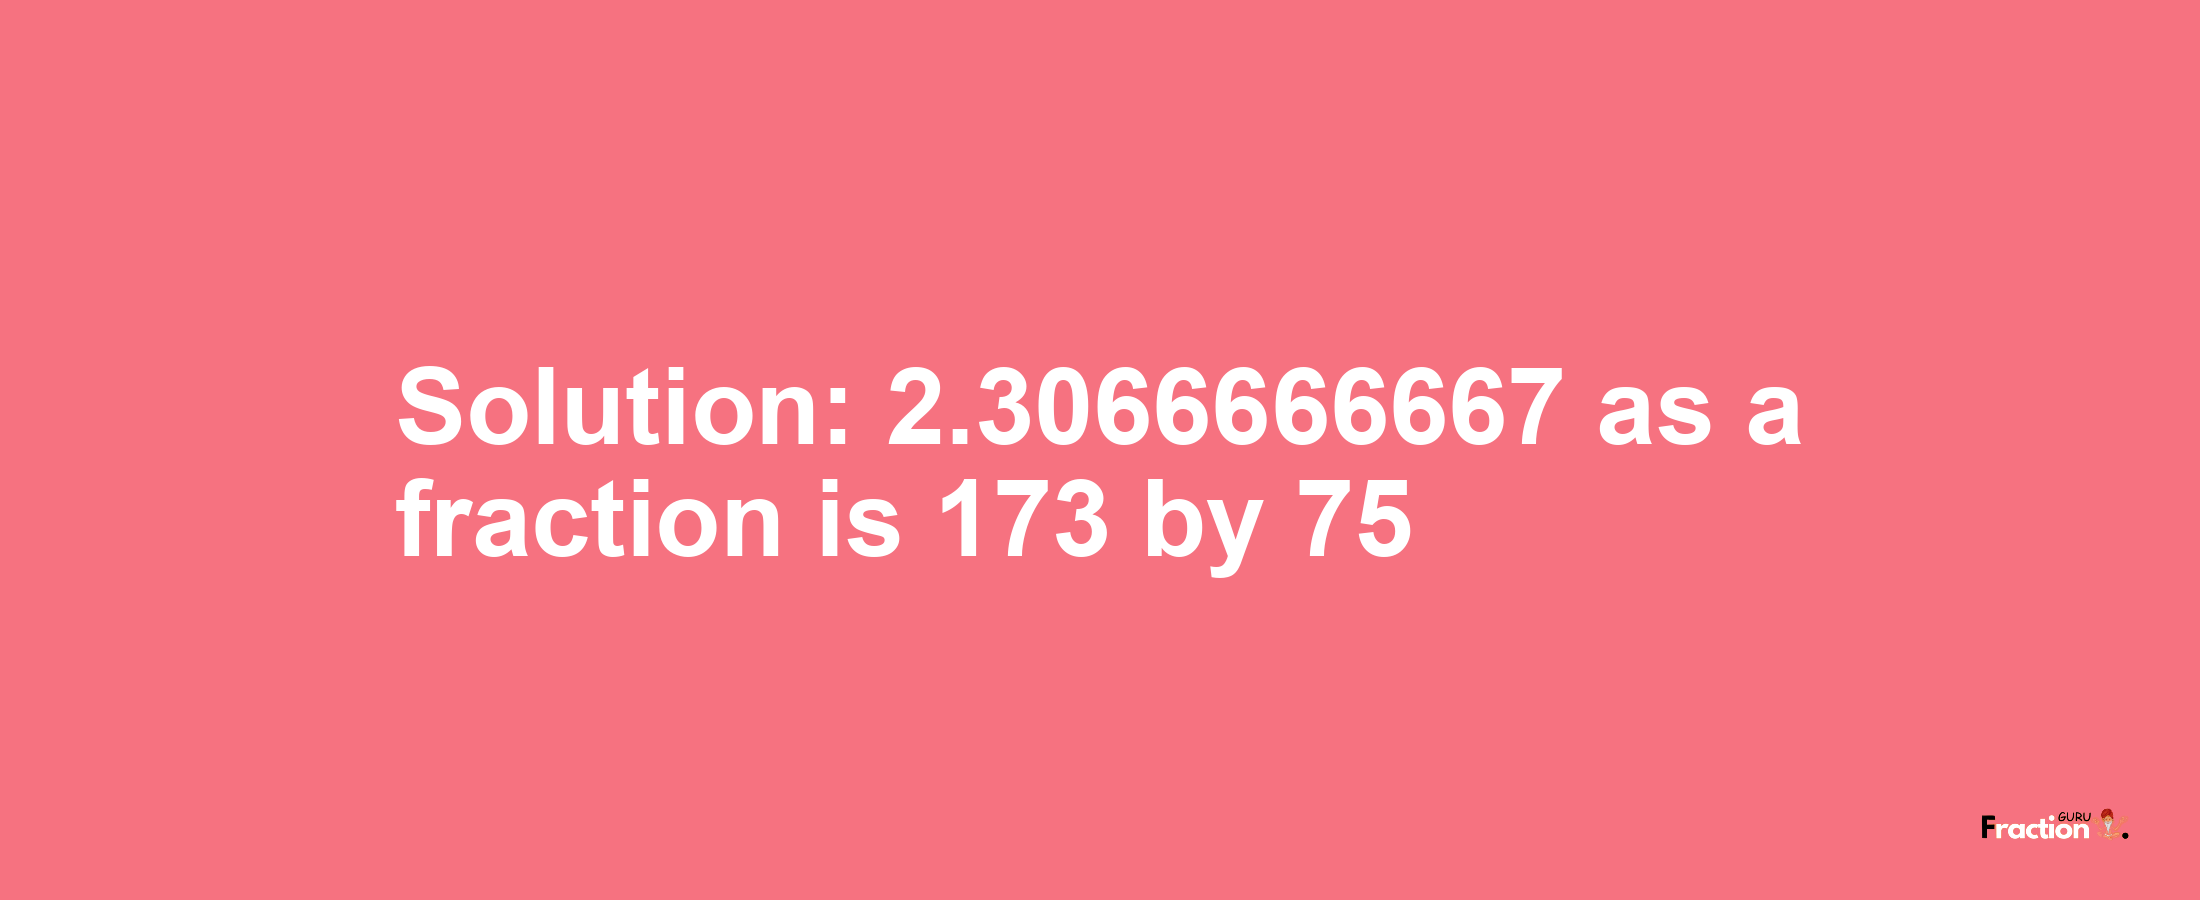 Solution:2.3066666667 as a fraction is 173/75